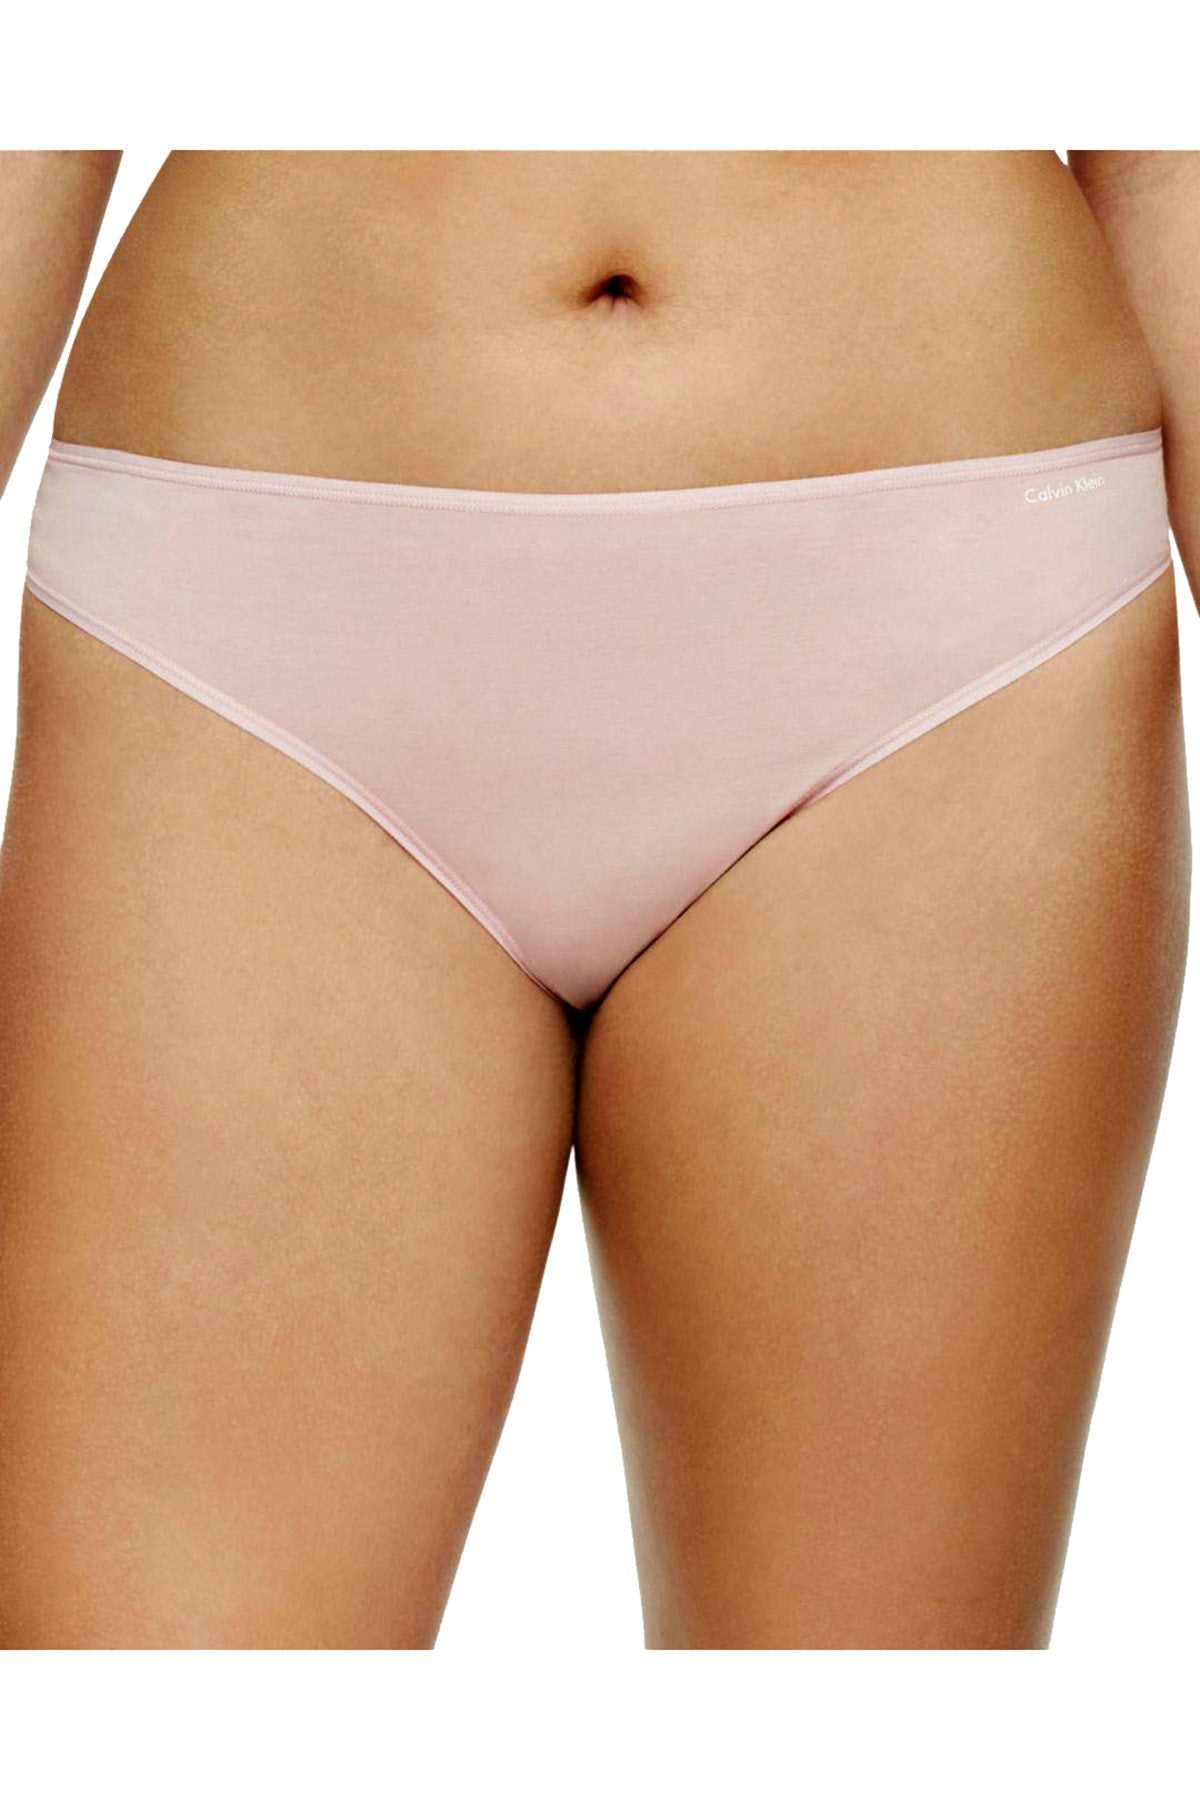 Calvin Klein PLUS Connected-Pink Cotton Form Thong